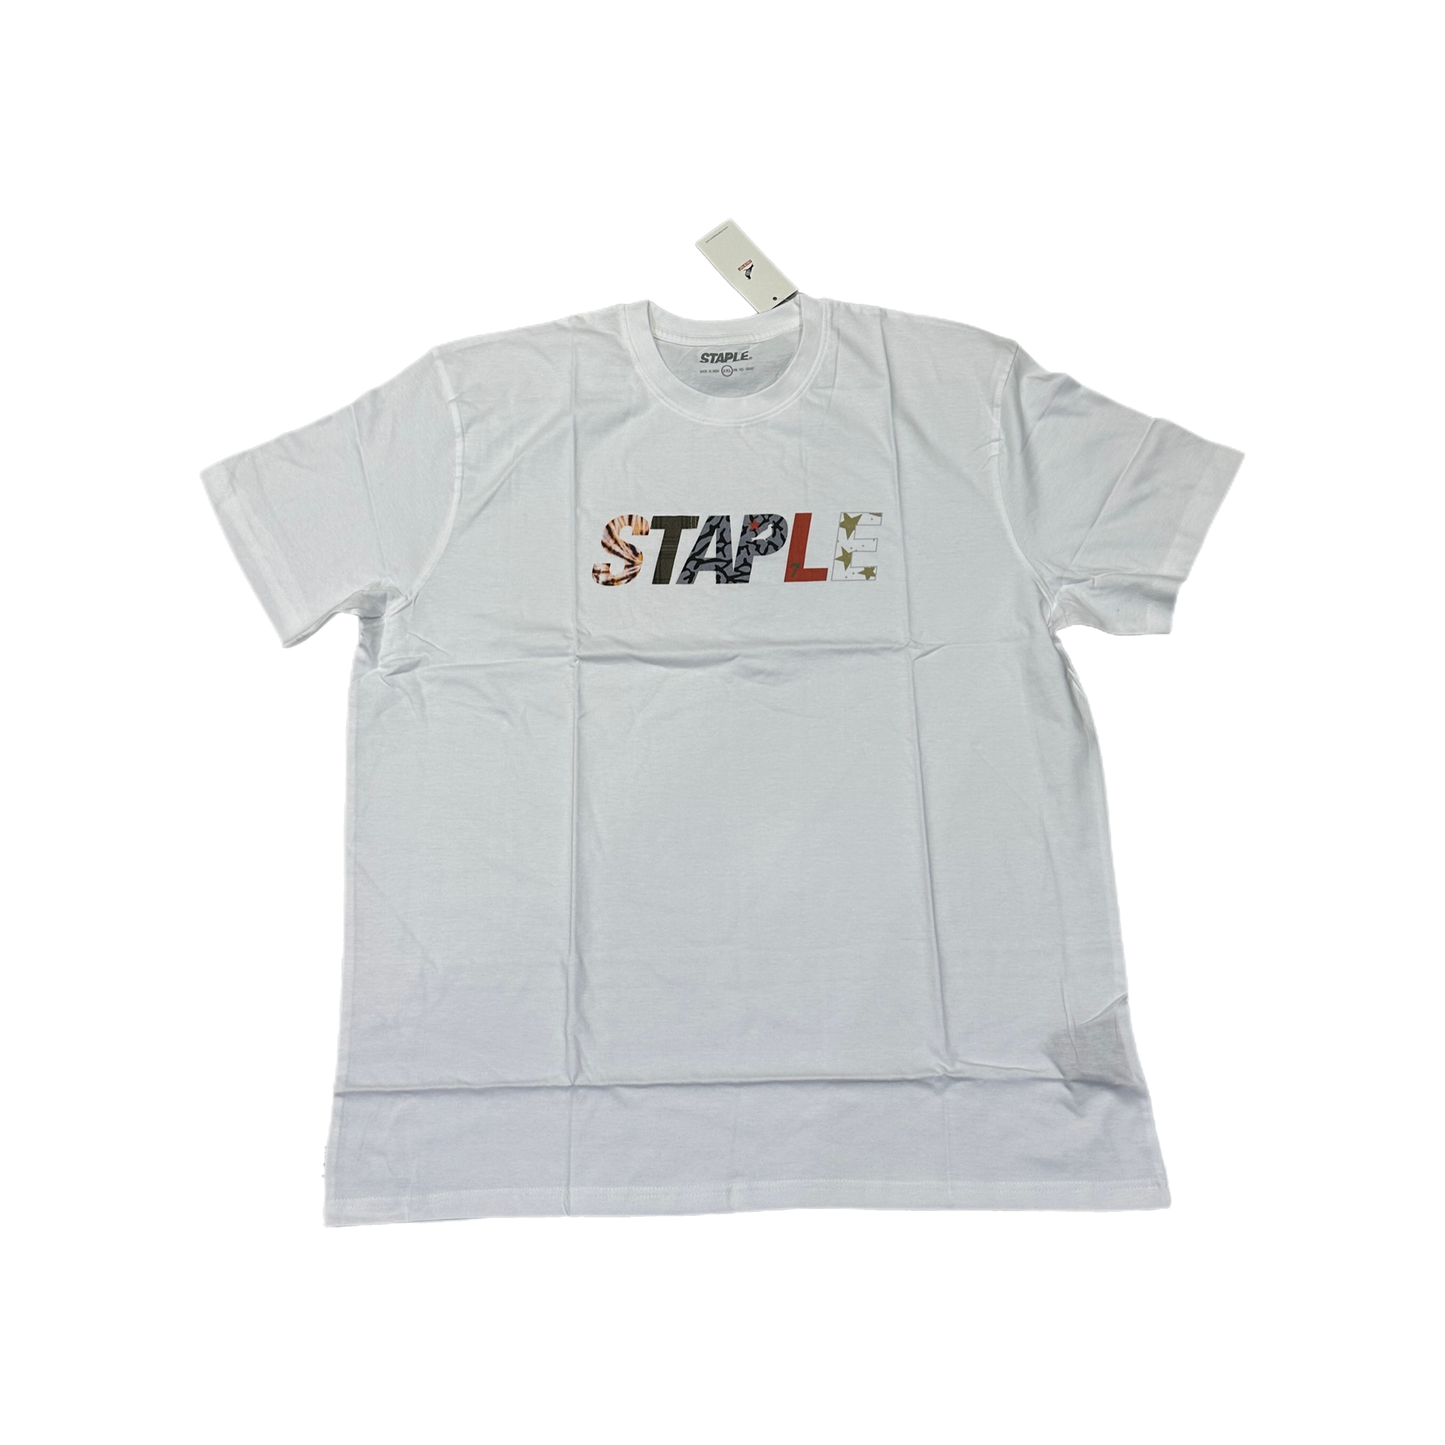 Staple -" Nike Dunk Spellout Tee"- Size XX-Large